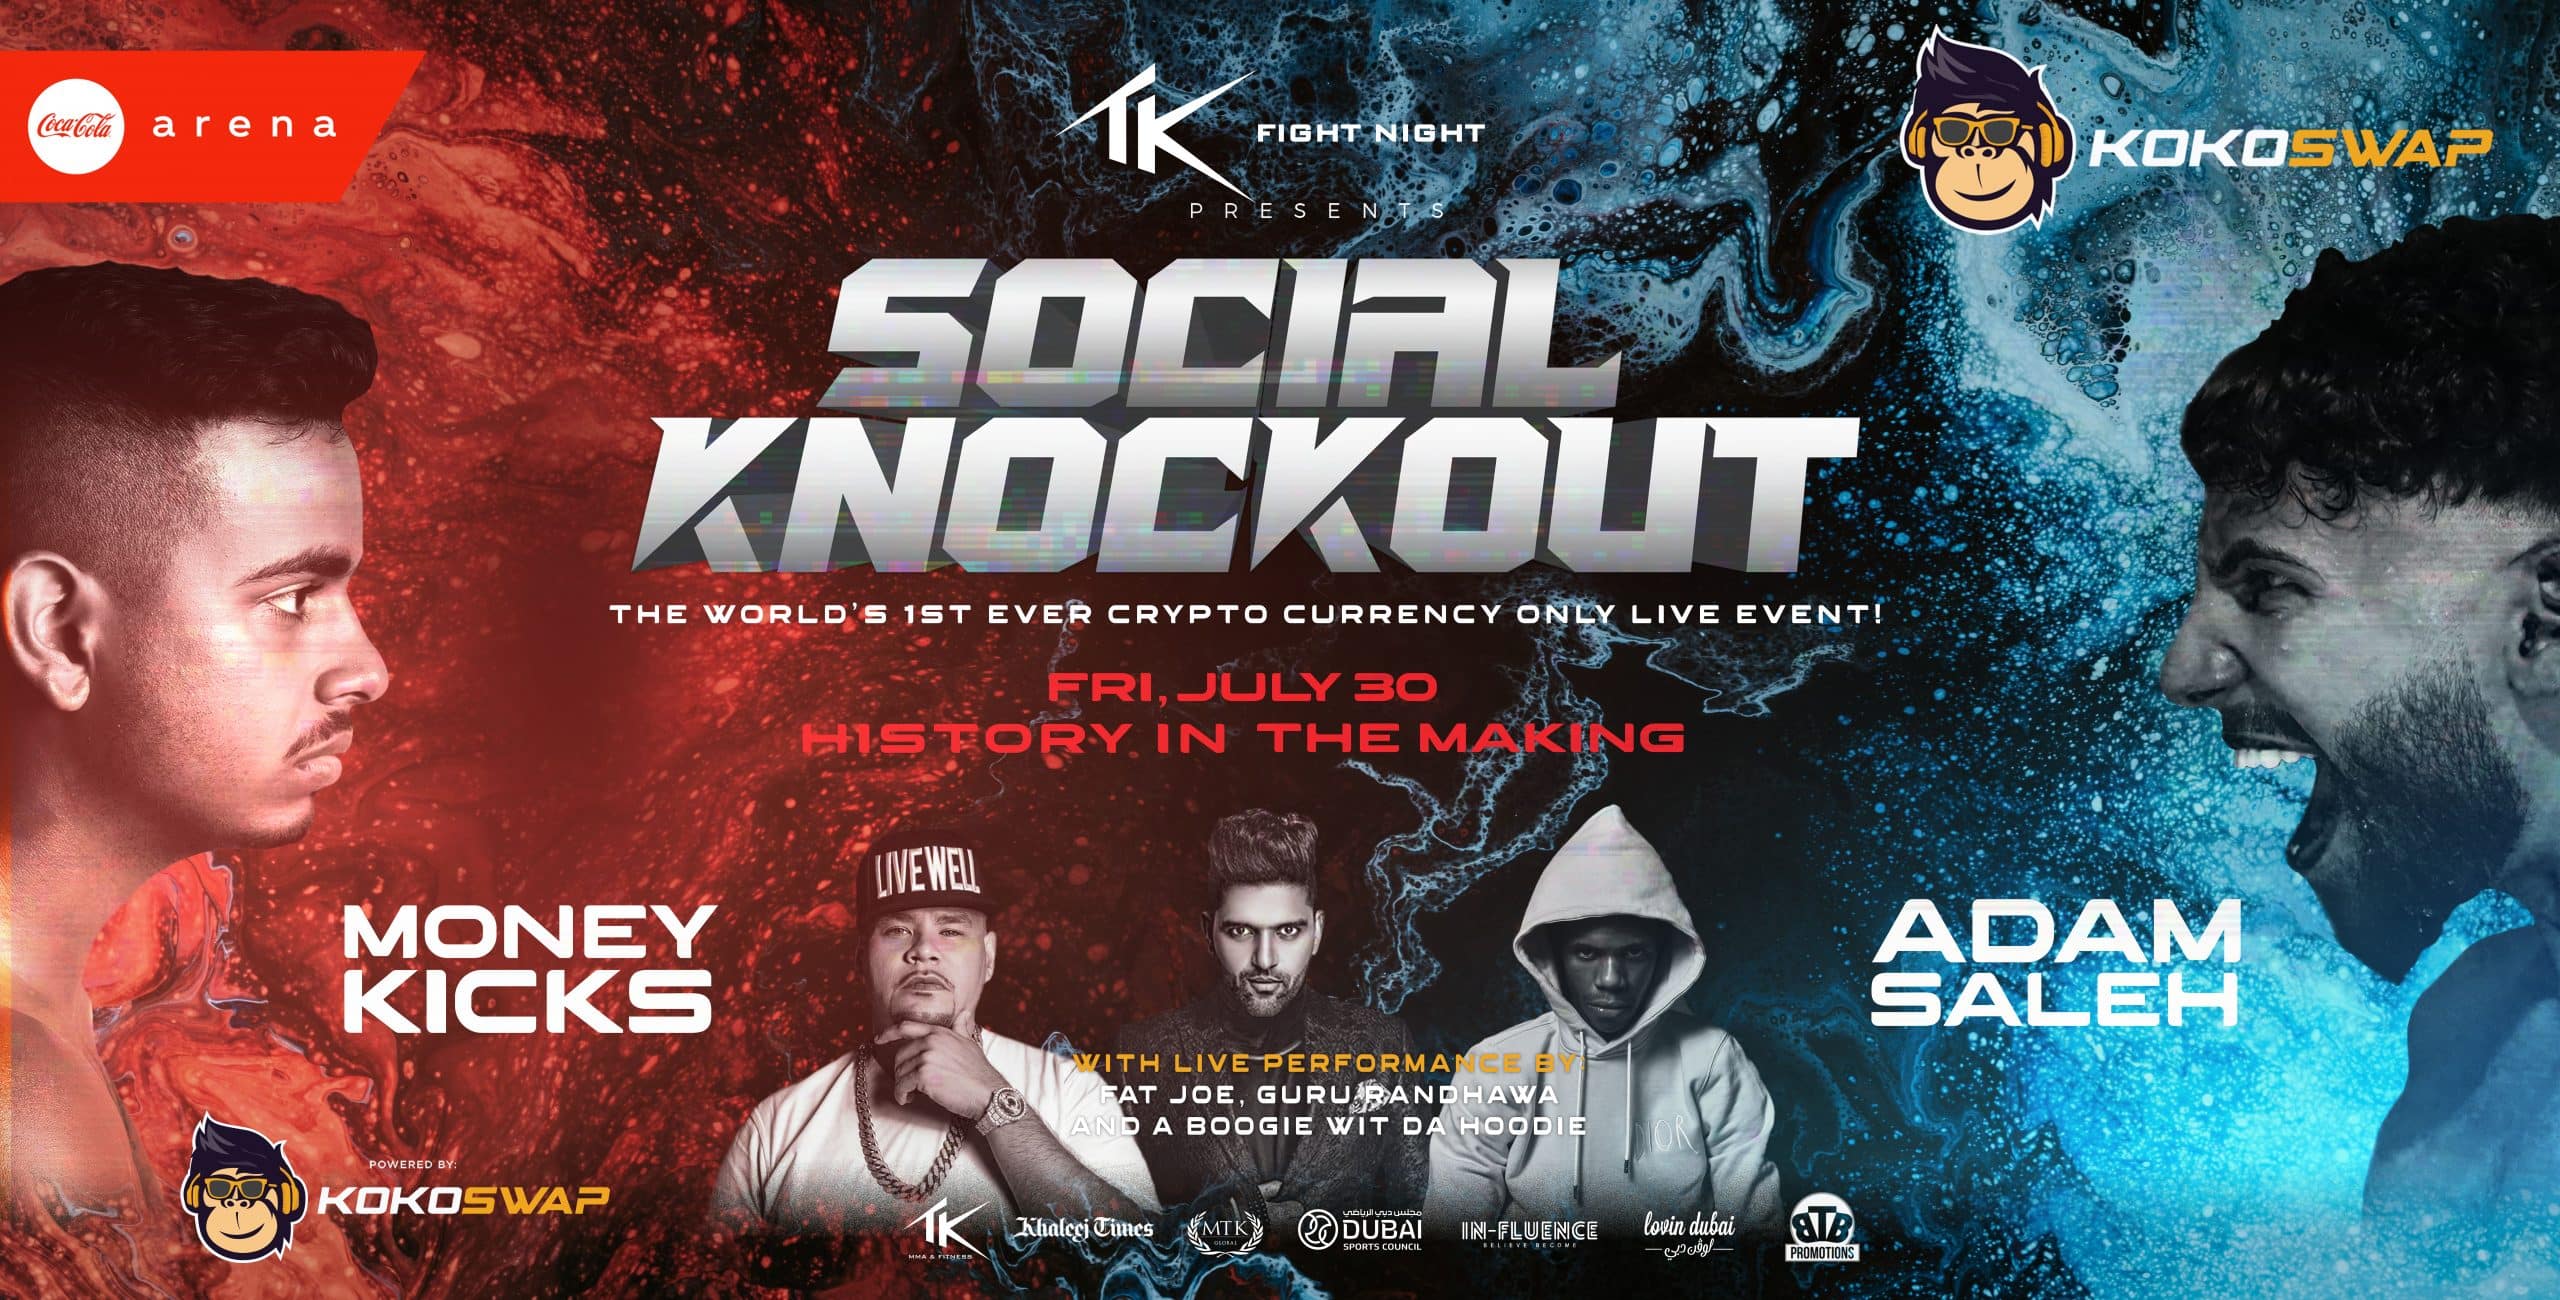 SOCIAL KNOCKOUT is Officially Confirmed to Take Place on July 30th - 1